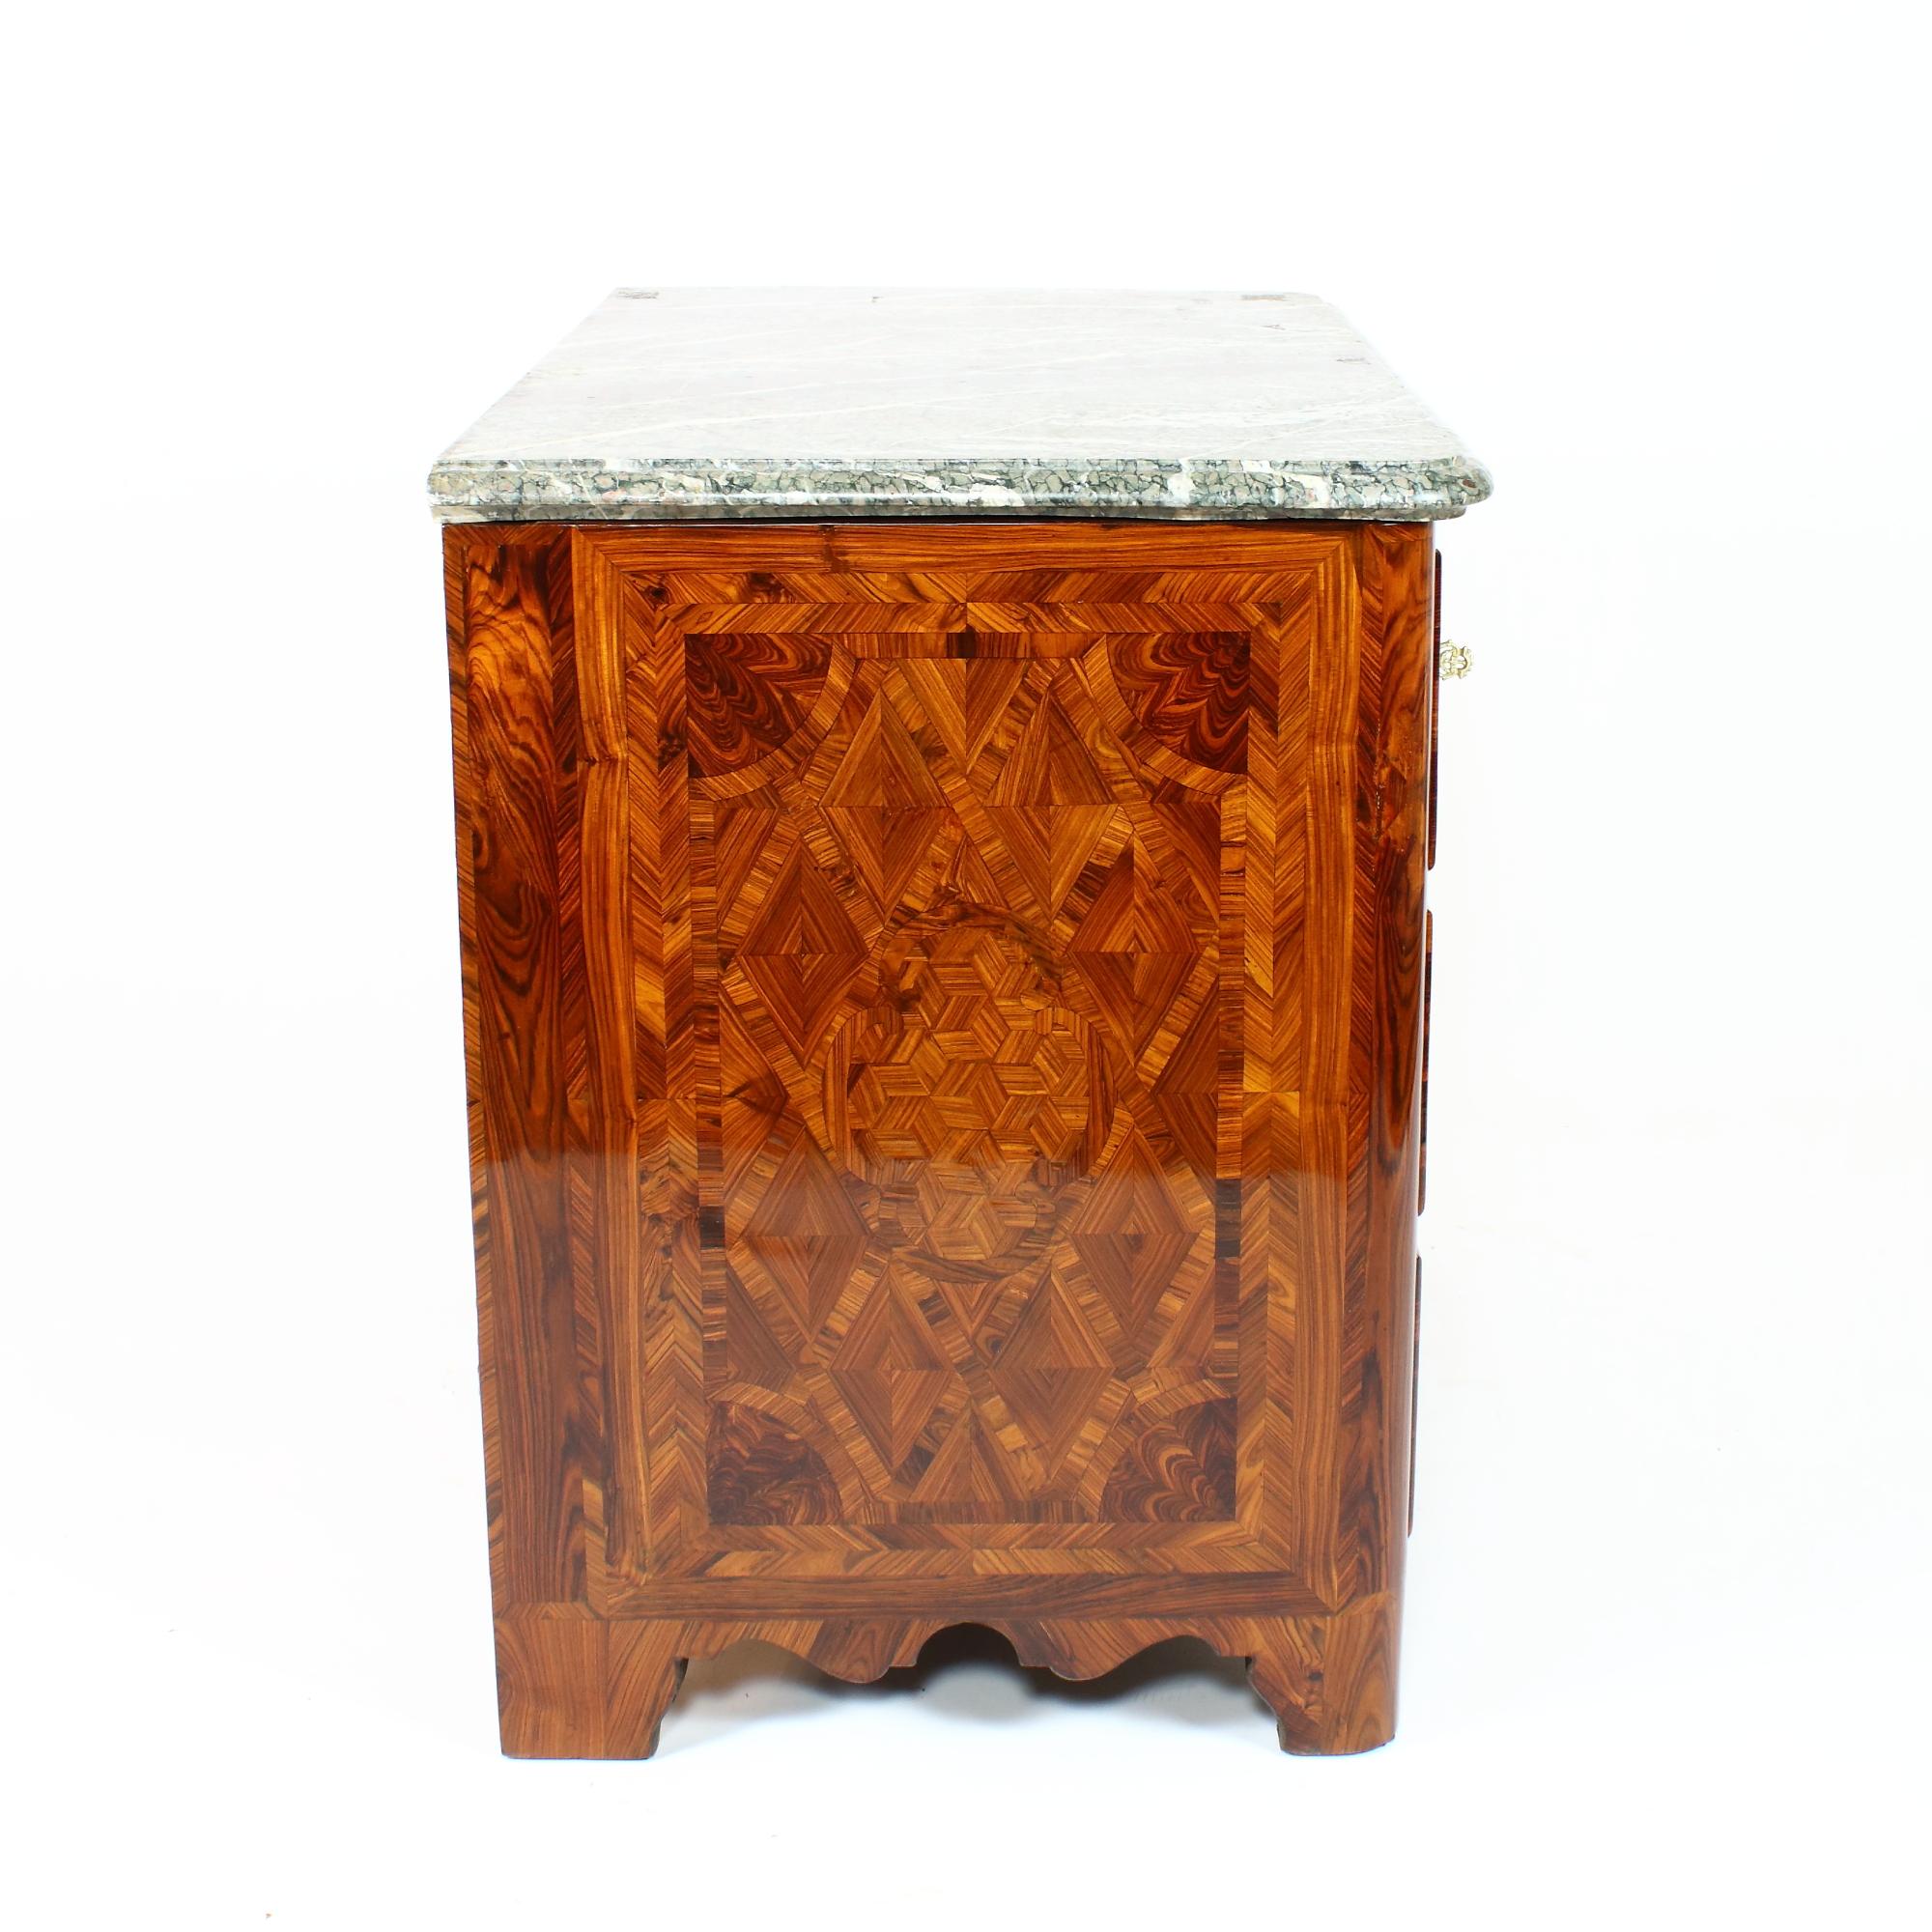 Early 18th Century French Louis XIV/Régence Period Trellis Marquetry Commode For Sale 2